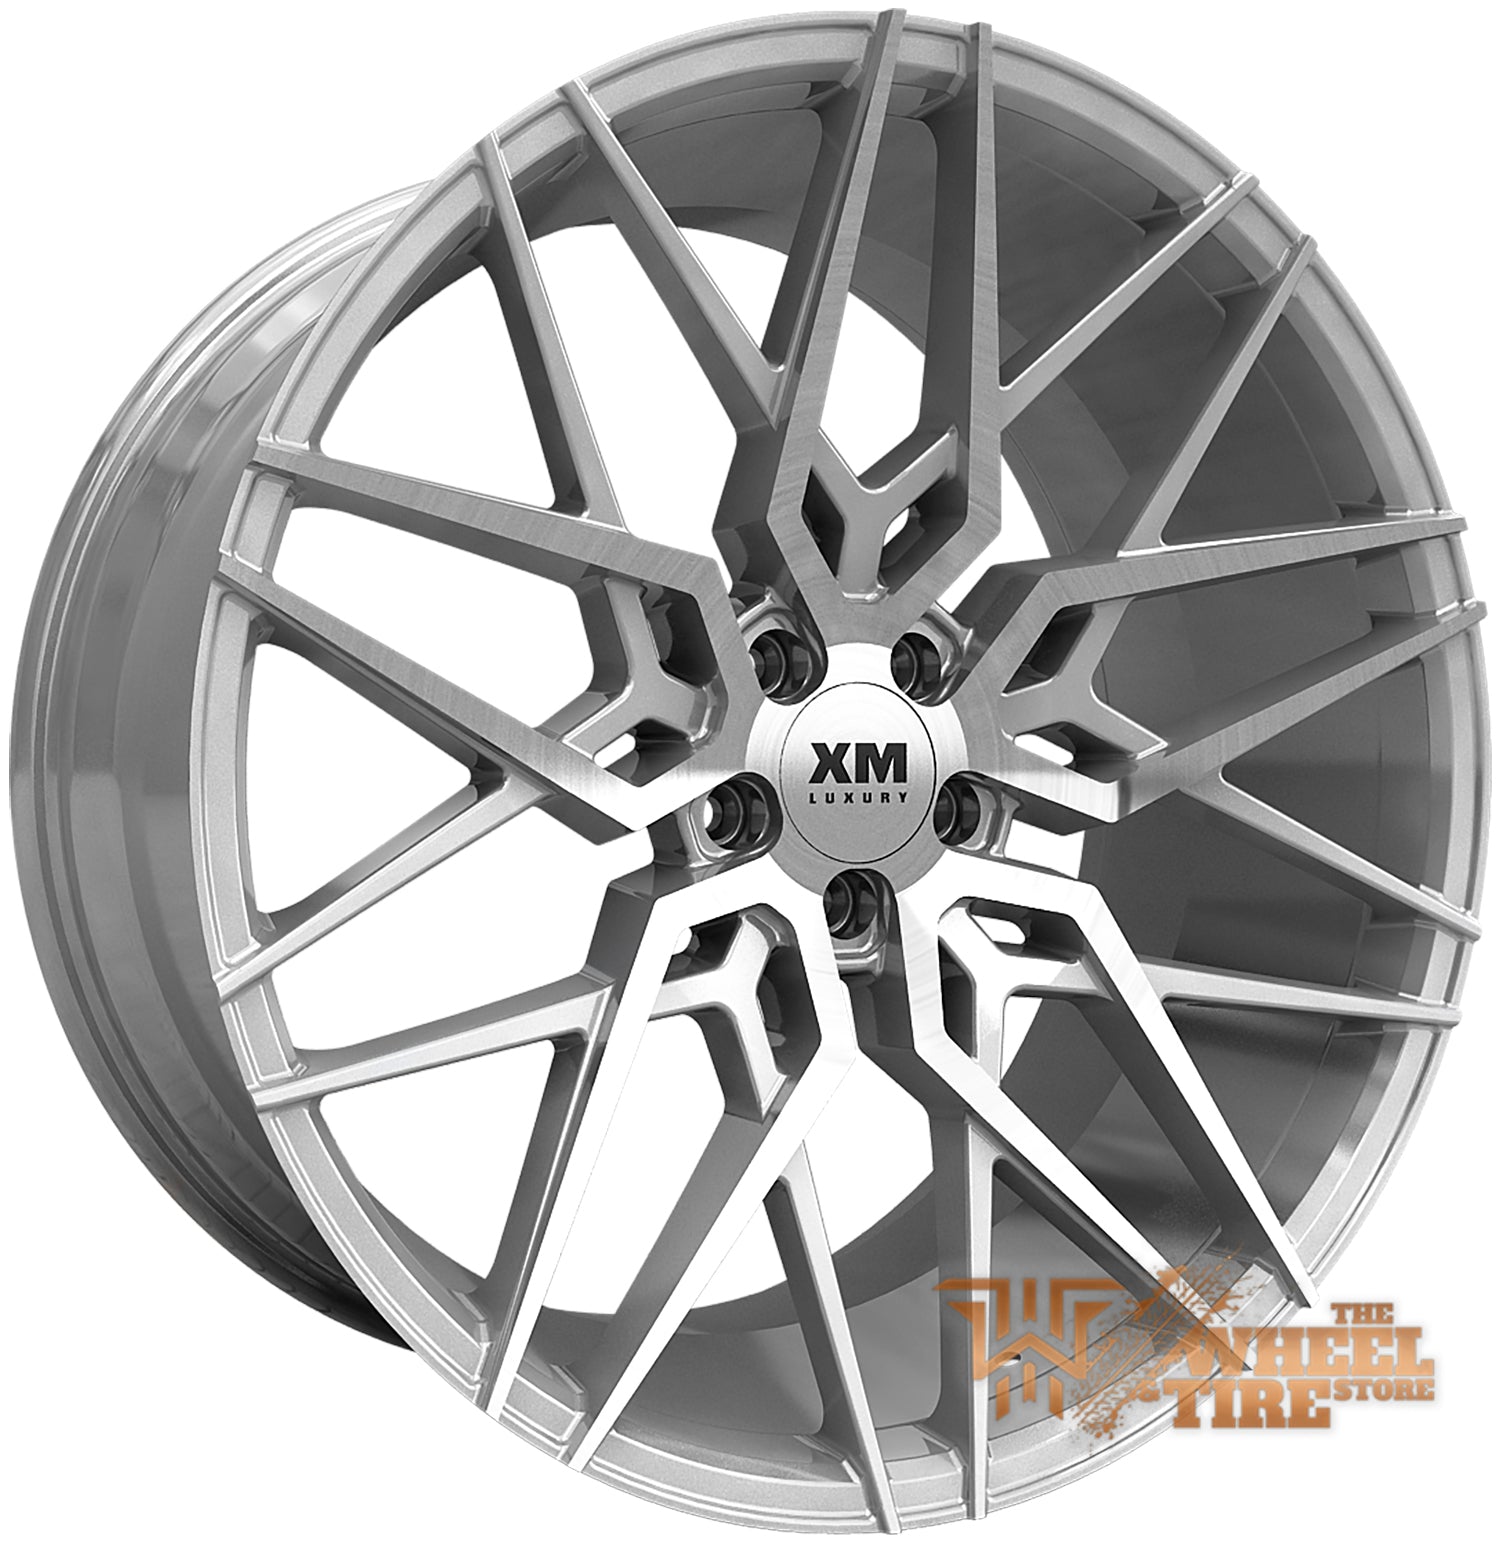 XM LUXURY XM-209 Wheel in Silver Machined Face (Set of 4)